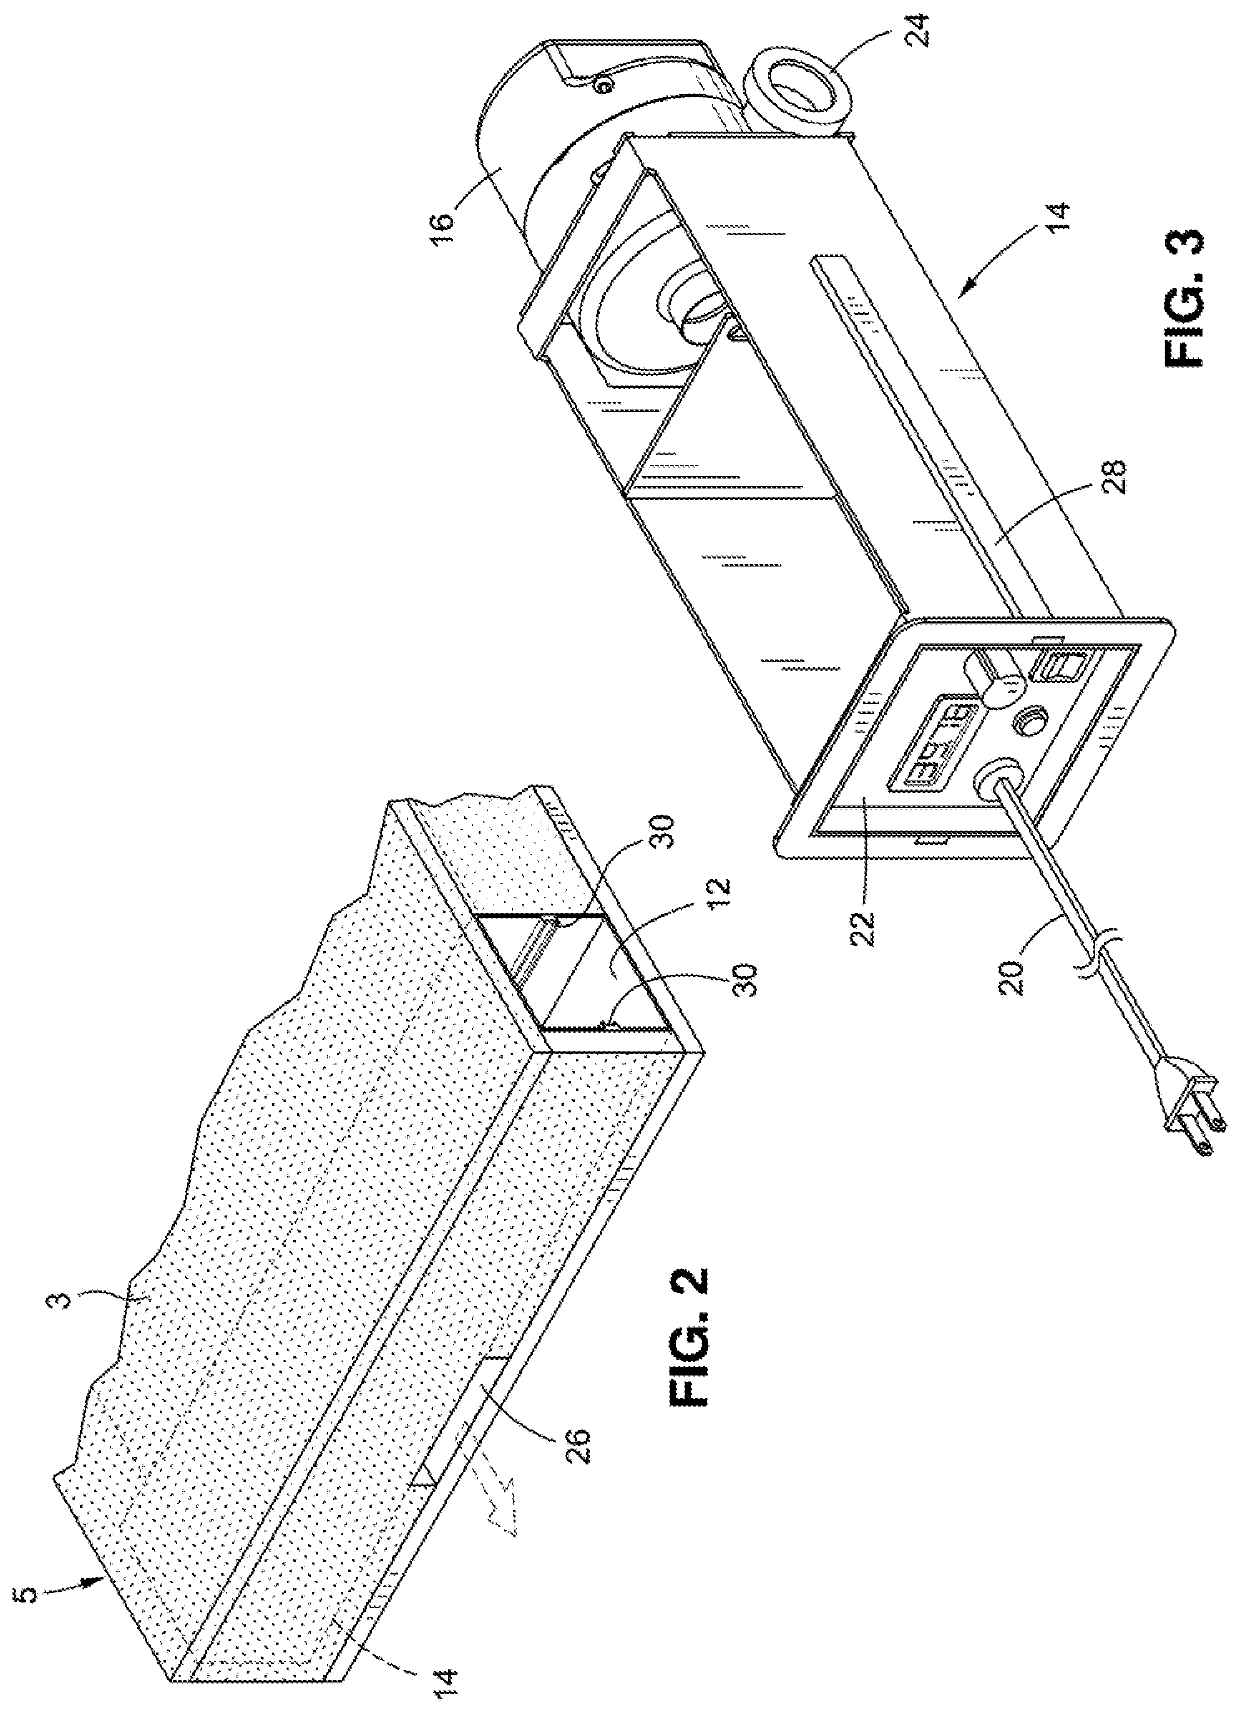 Low air loss mattress having a low acoustic signature and interchangeable air pump cartridge